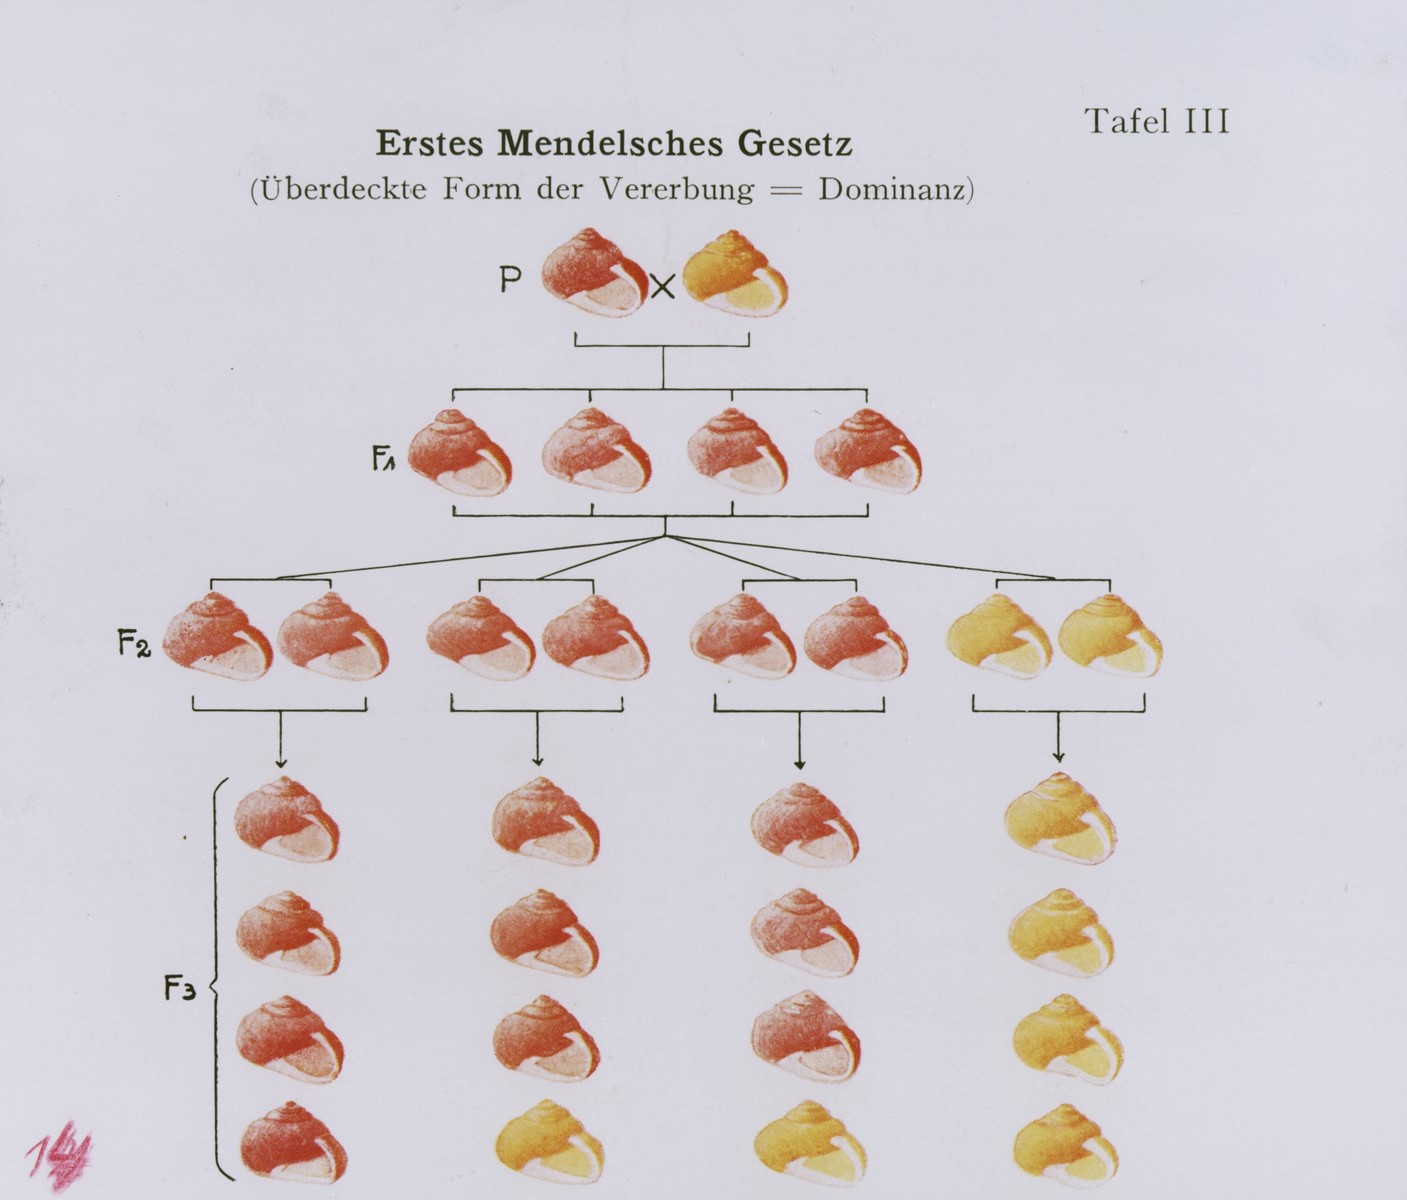 Chart illustrating the transmission of dominant genetic traits according to Gregor Mendel's first law of heredity.